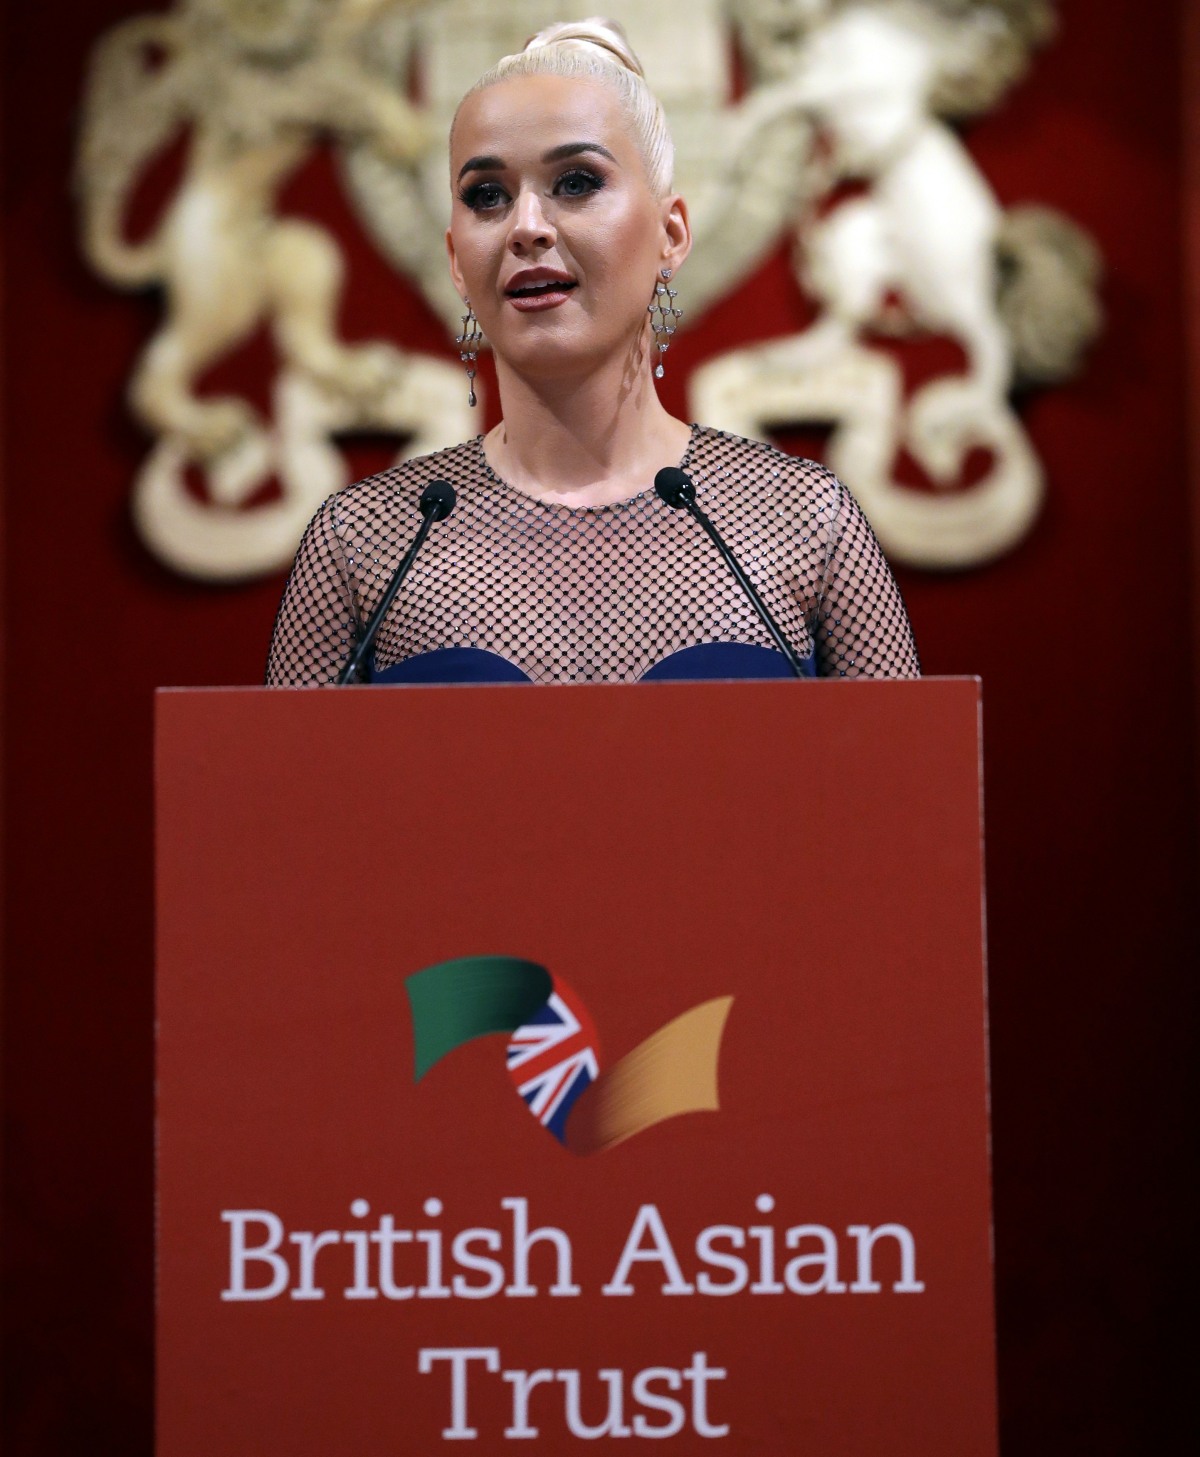 Musician Katy Perry gives a speech as she attends a reception for supporters of the British Asian Trust in London, Tuesday, Feb. 4, 2020.